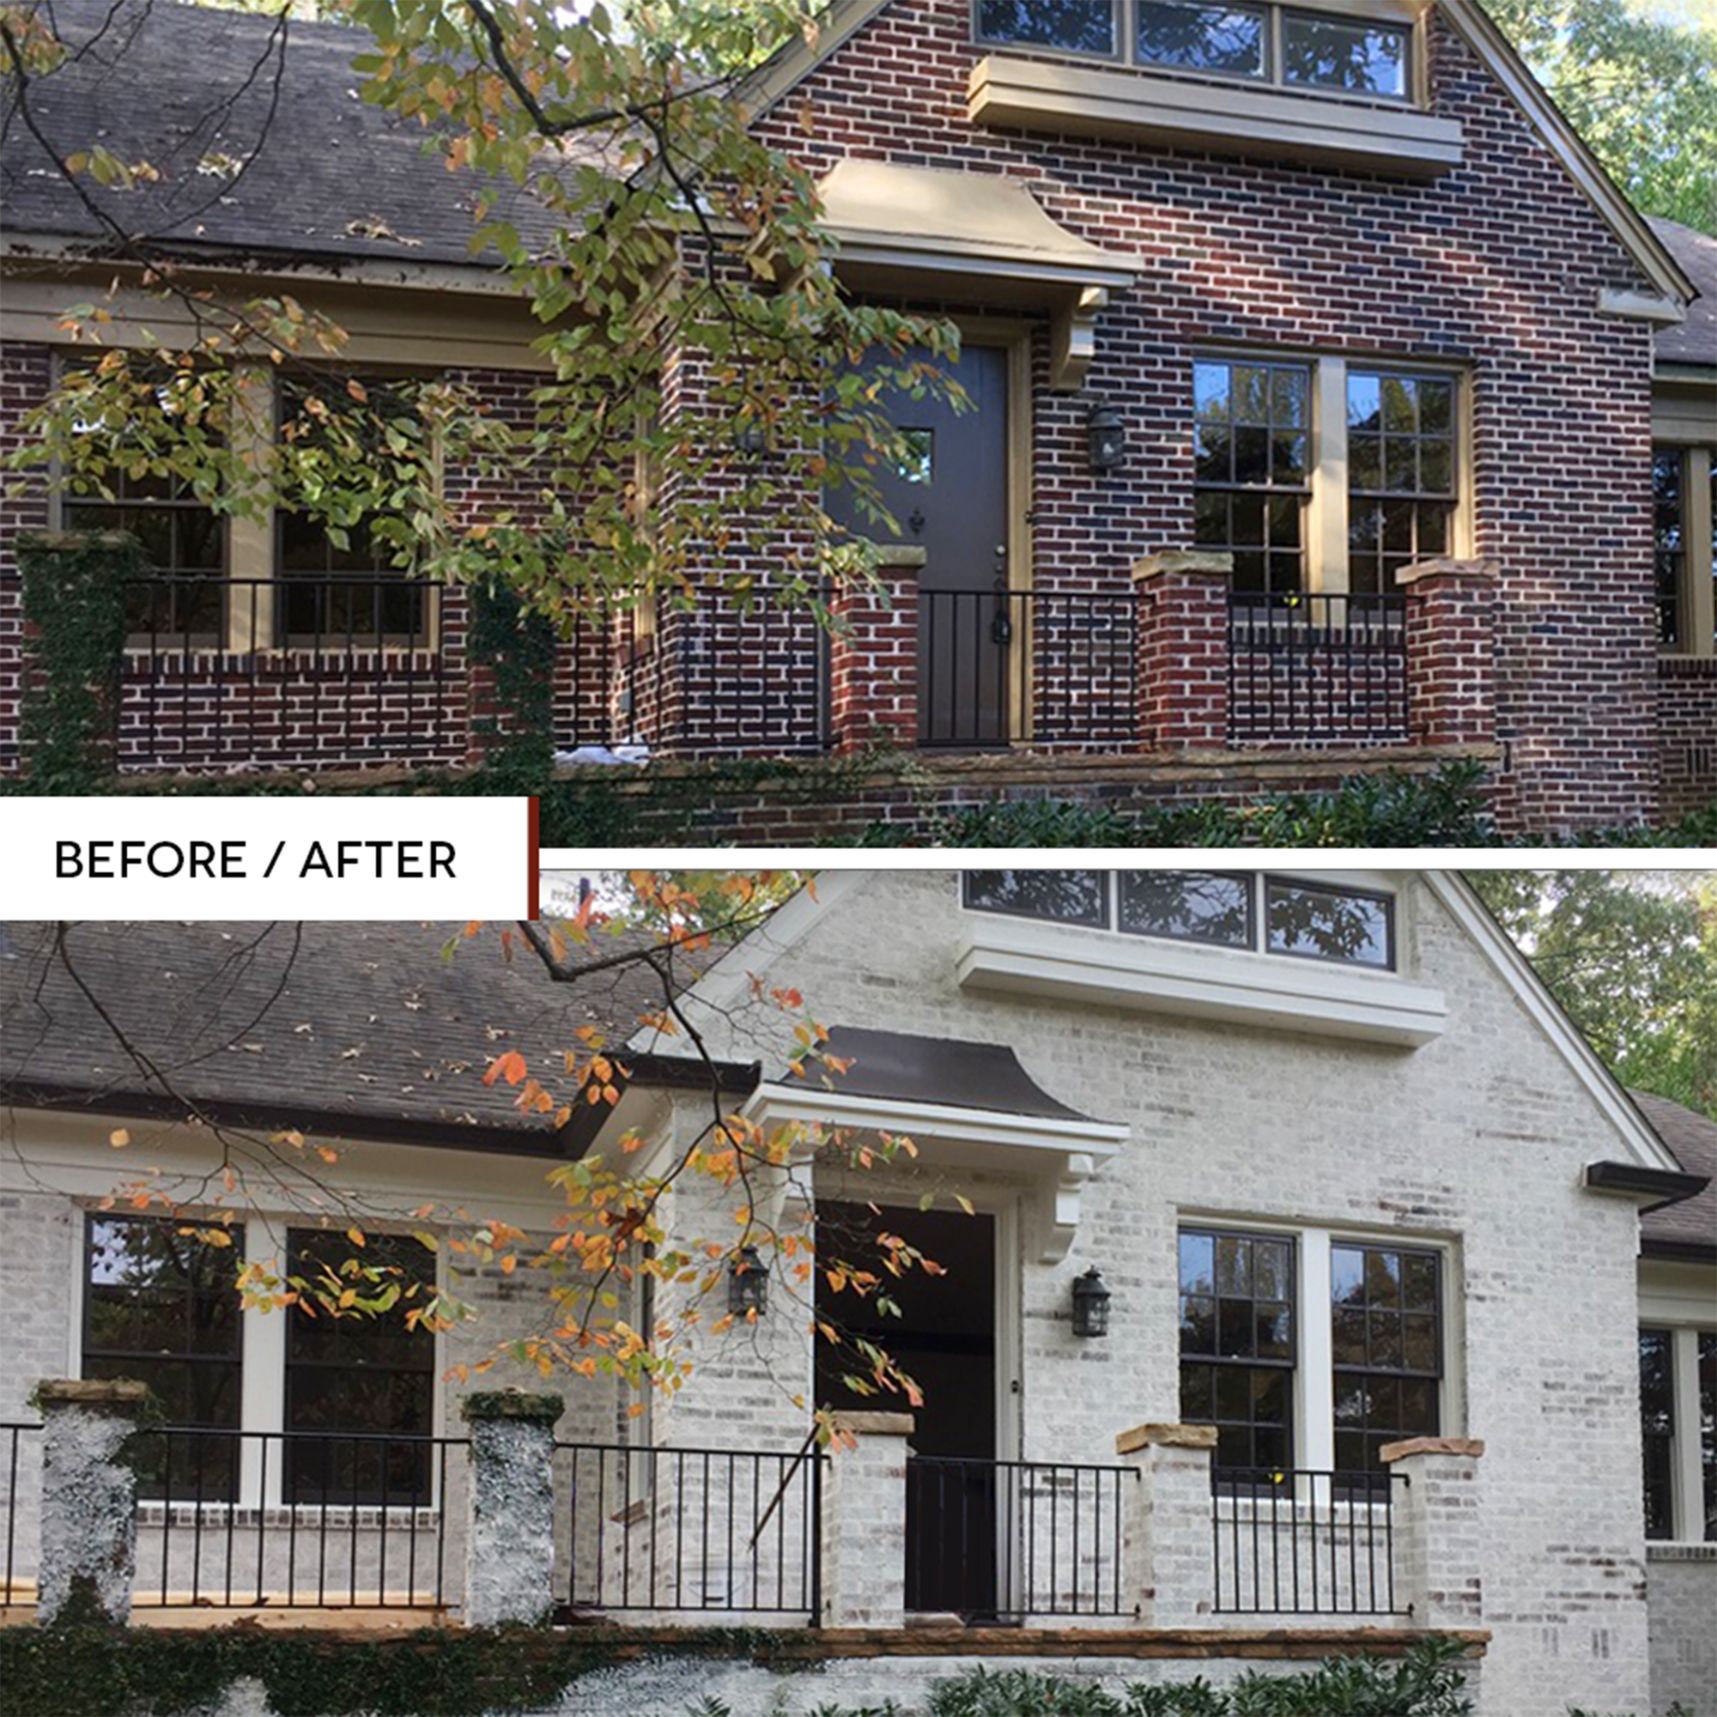 Before & After brick home whitewashed in Classico Limewash